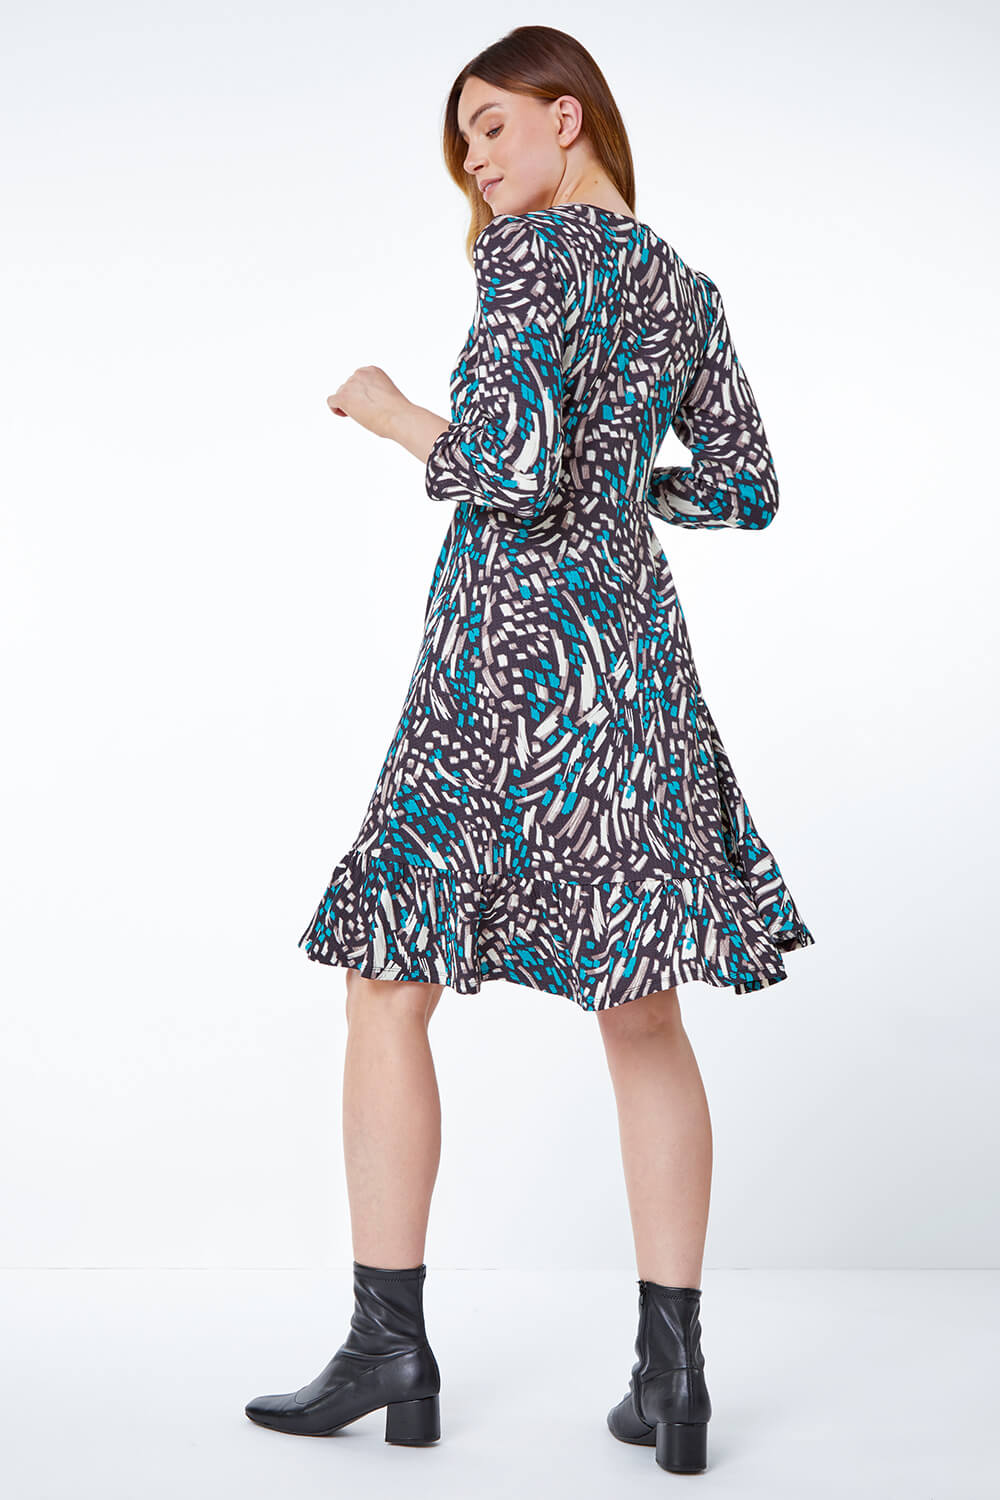 Teal Abstract Frill Hem Dress, Image 3 of 5